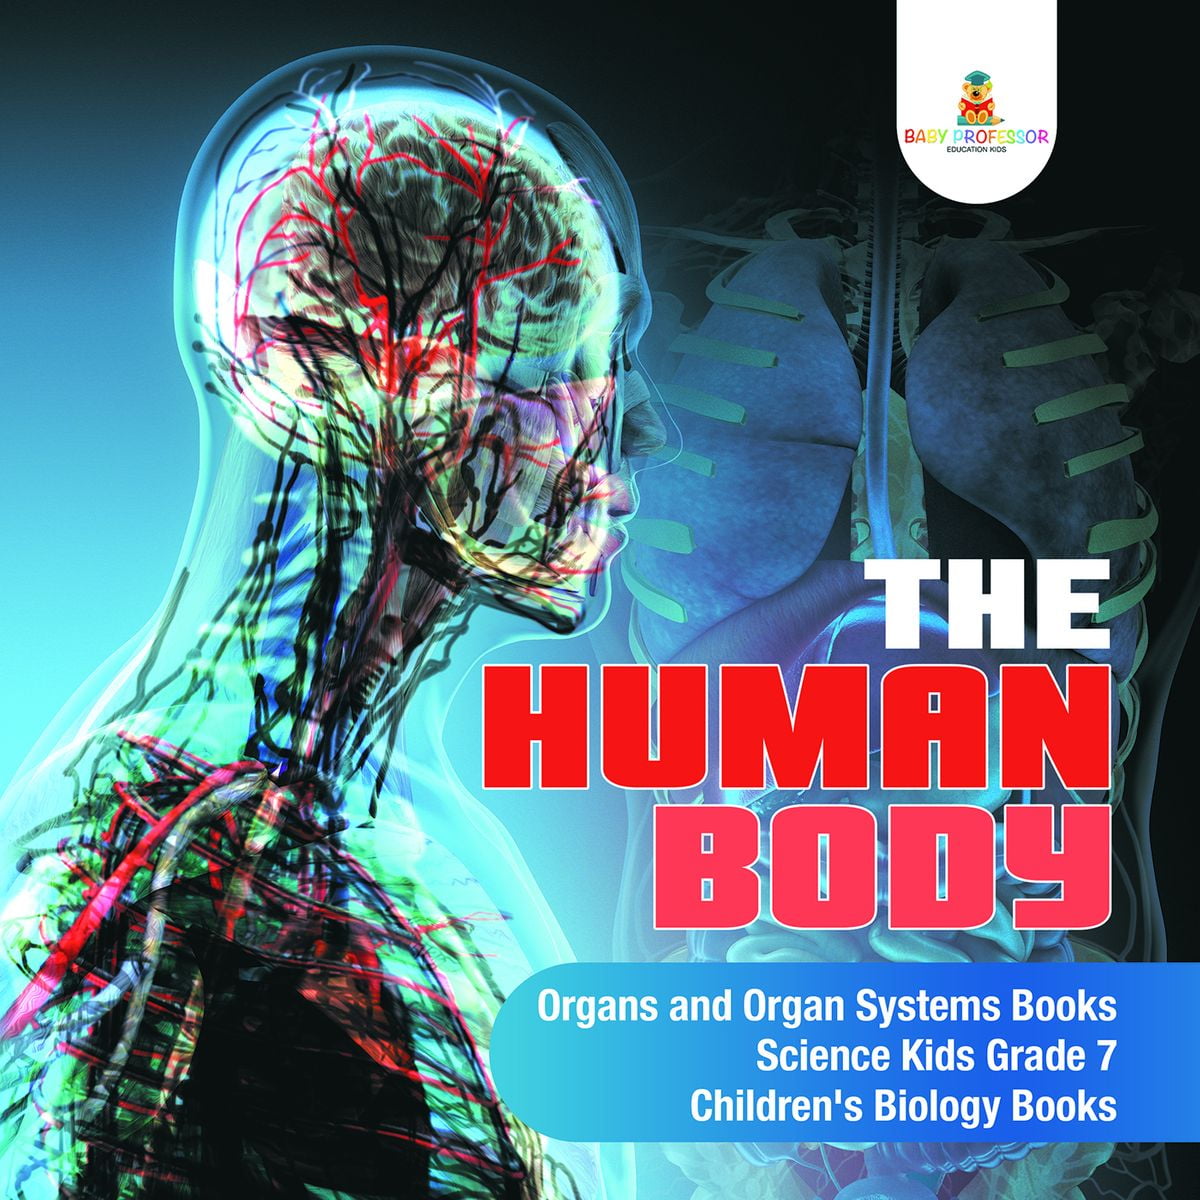 The Human Body | Organs and Organ Systems Books | Science Kids Grade 7